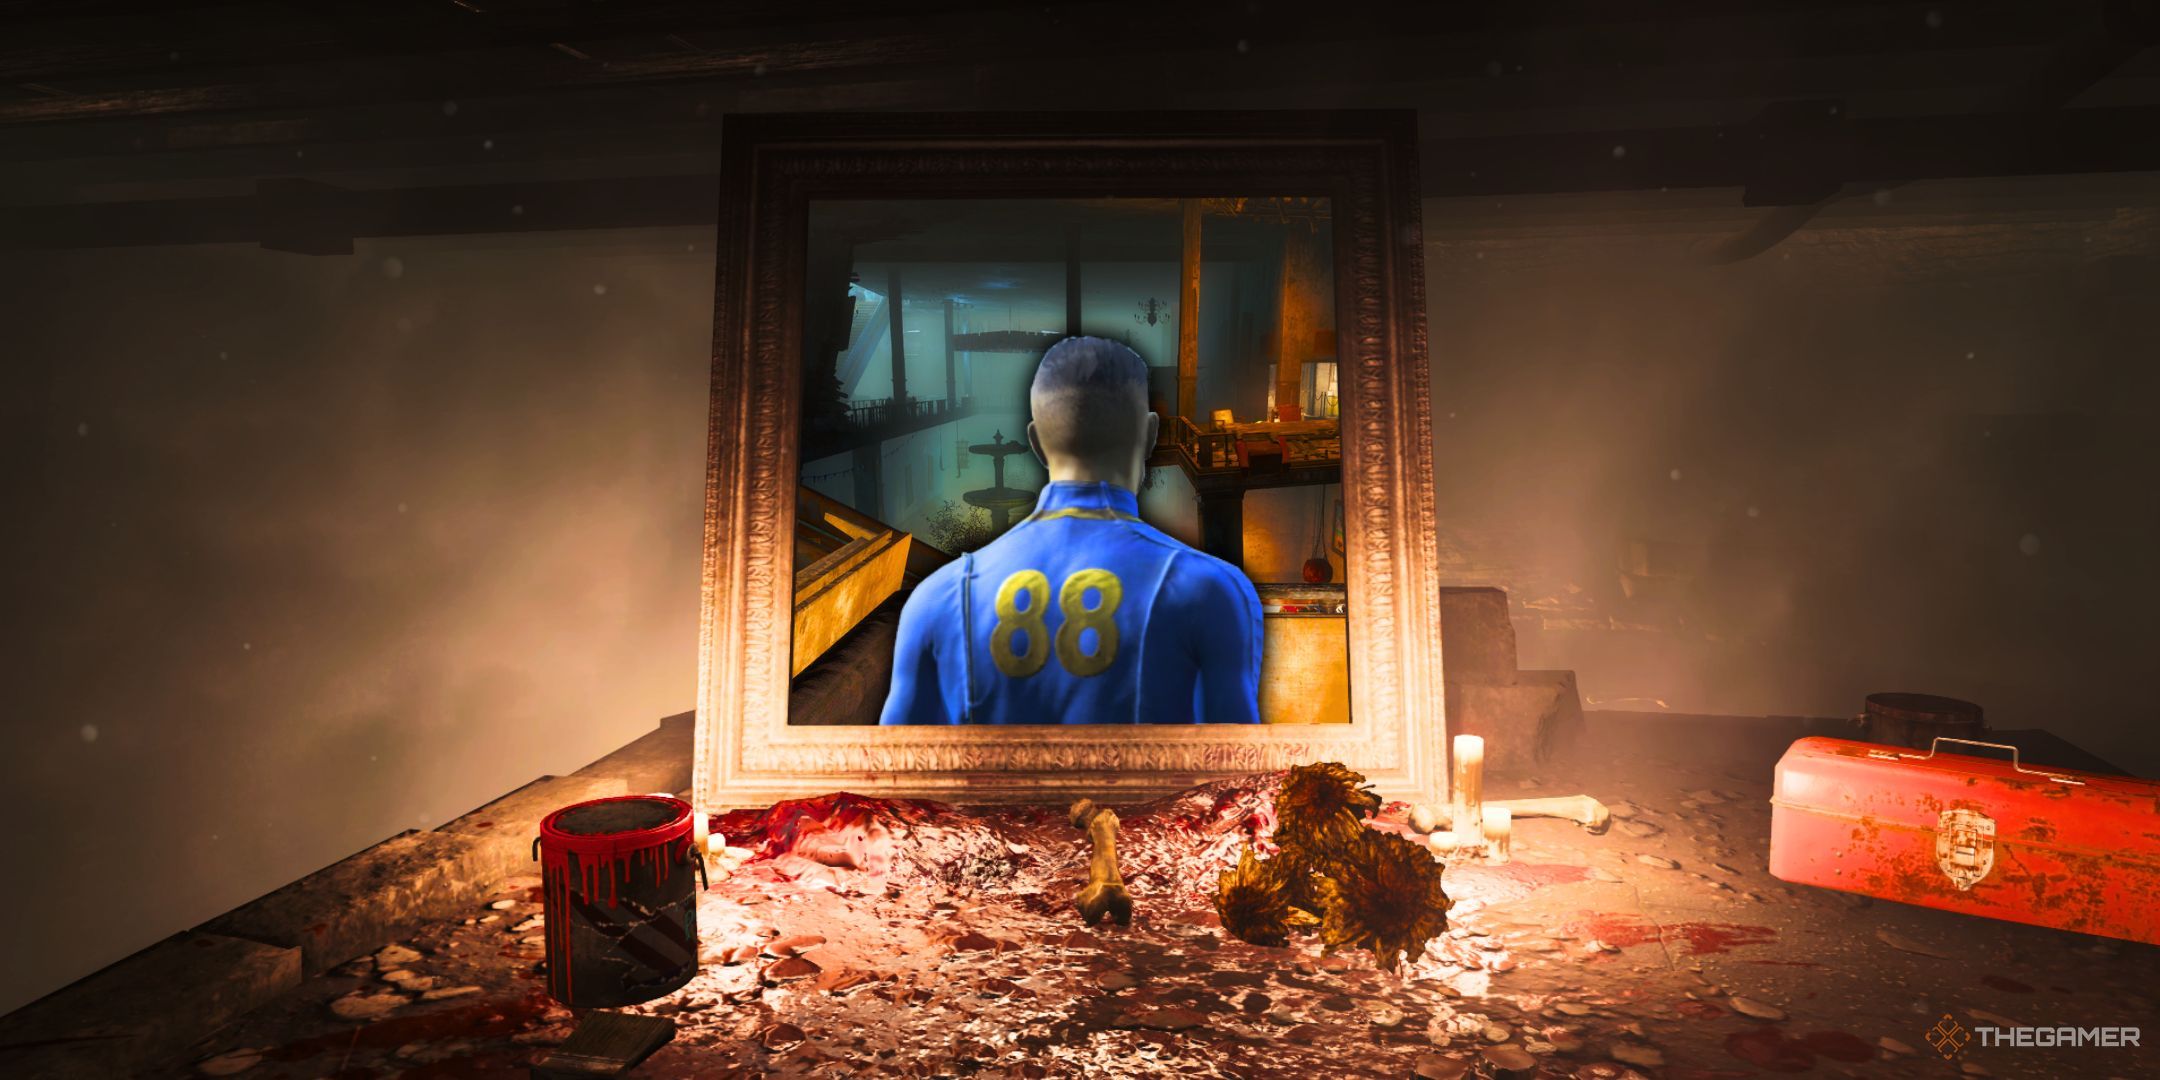 A painting frame in a candle-lit, dusty room, showing a masculine figure with a blue suit that has the yellow number 88 on it.